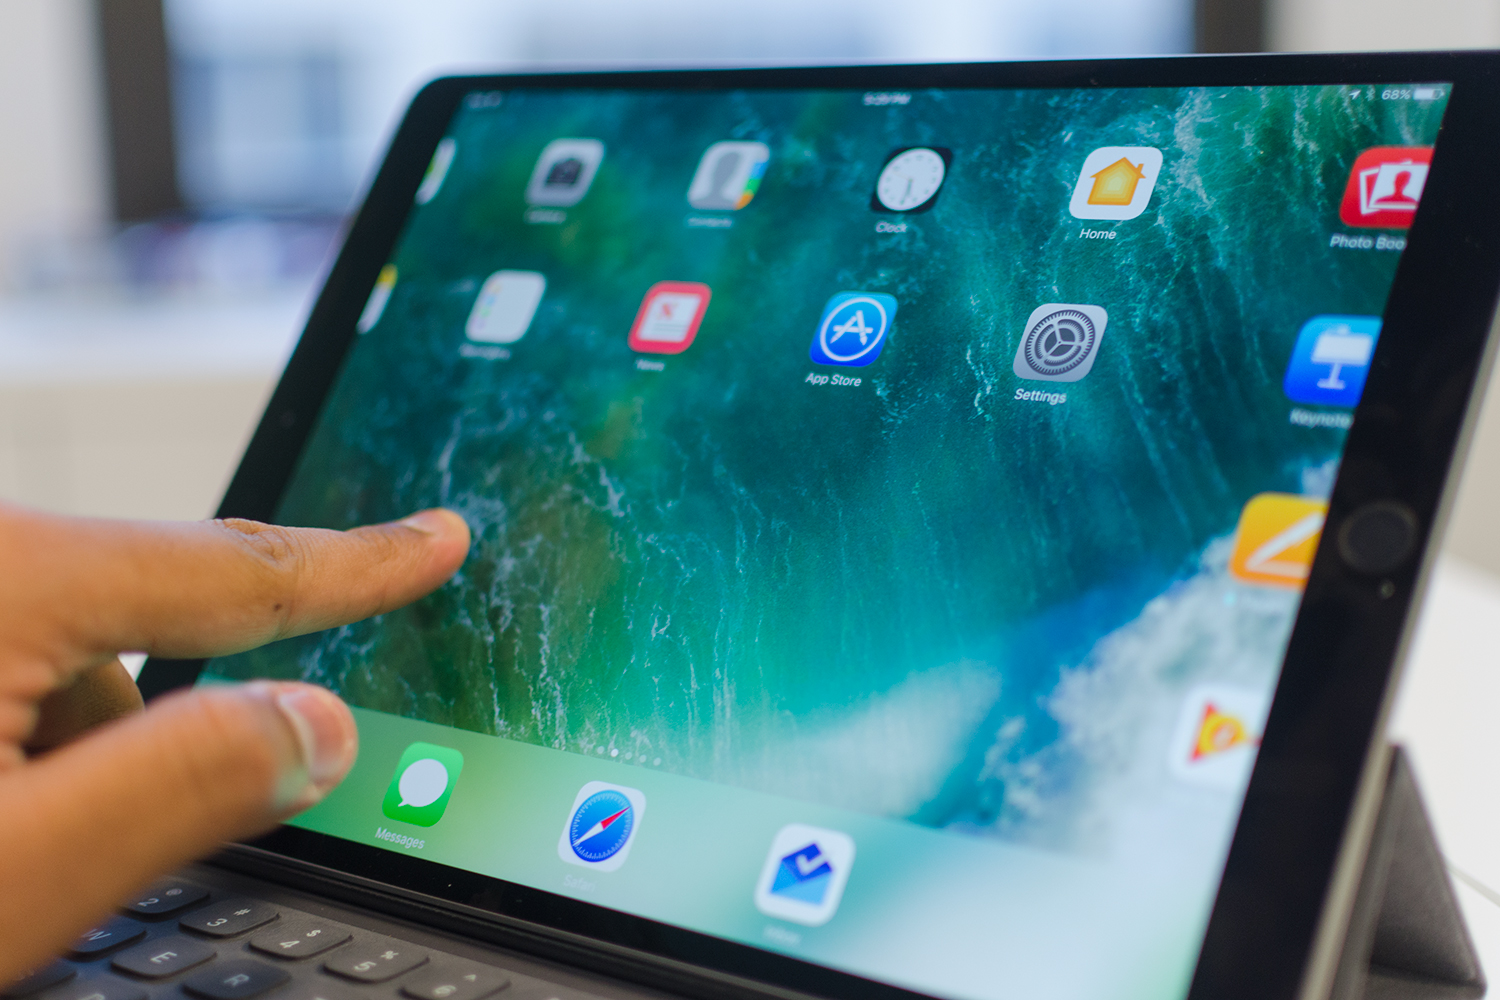 iPad (2018) Review: Why Would Anyone Need The iPad Pro 10.5 Now?